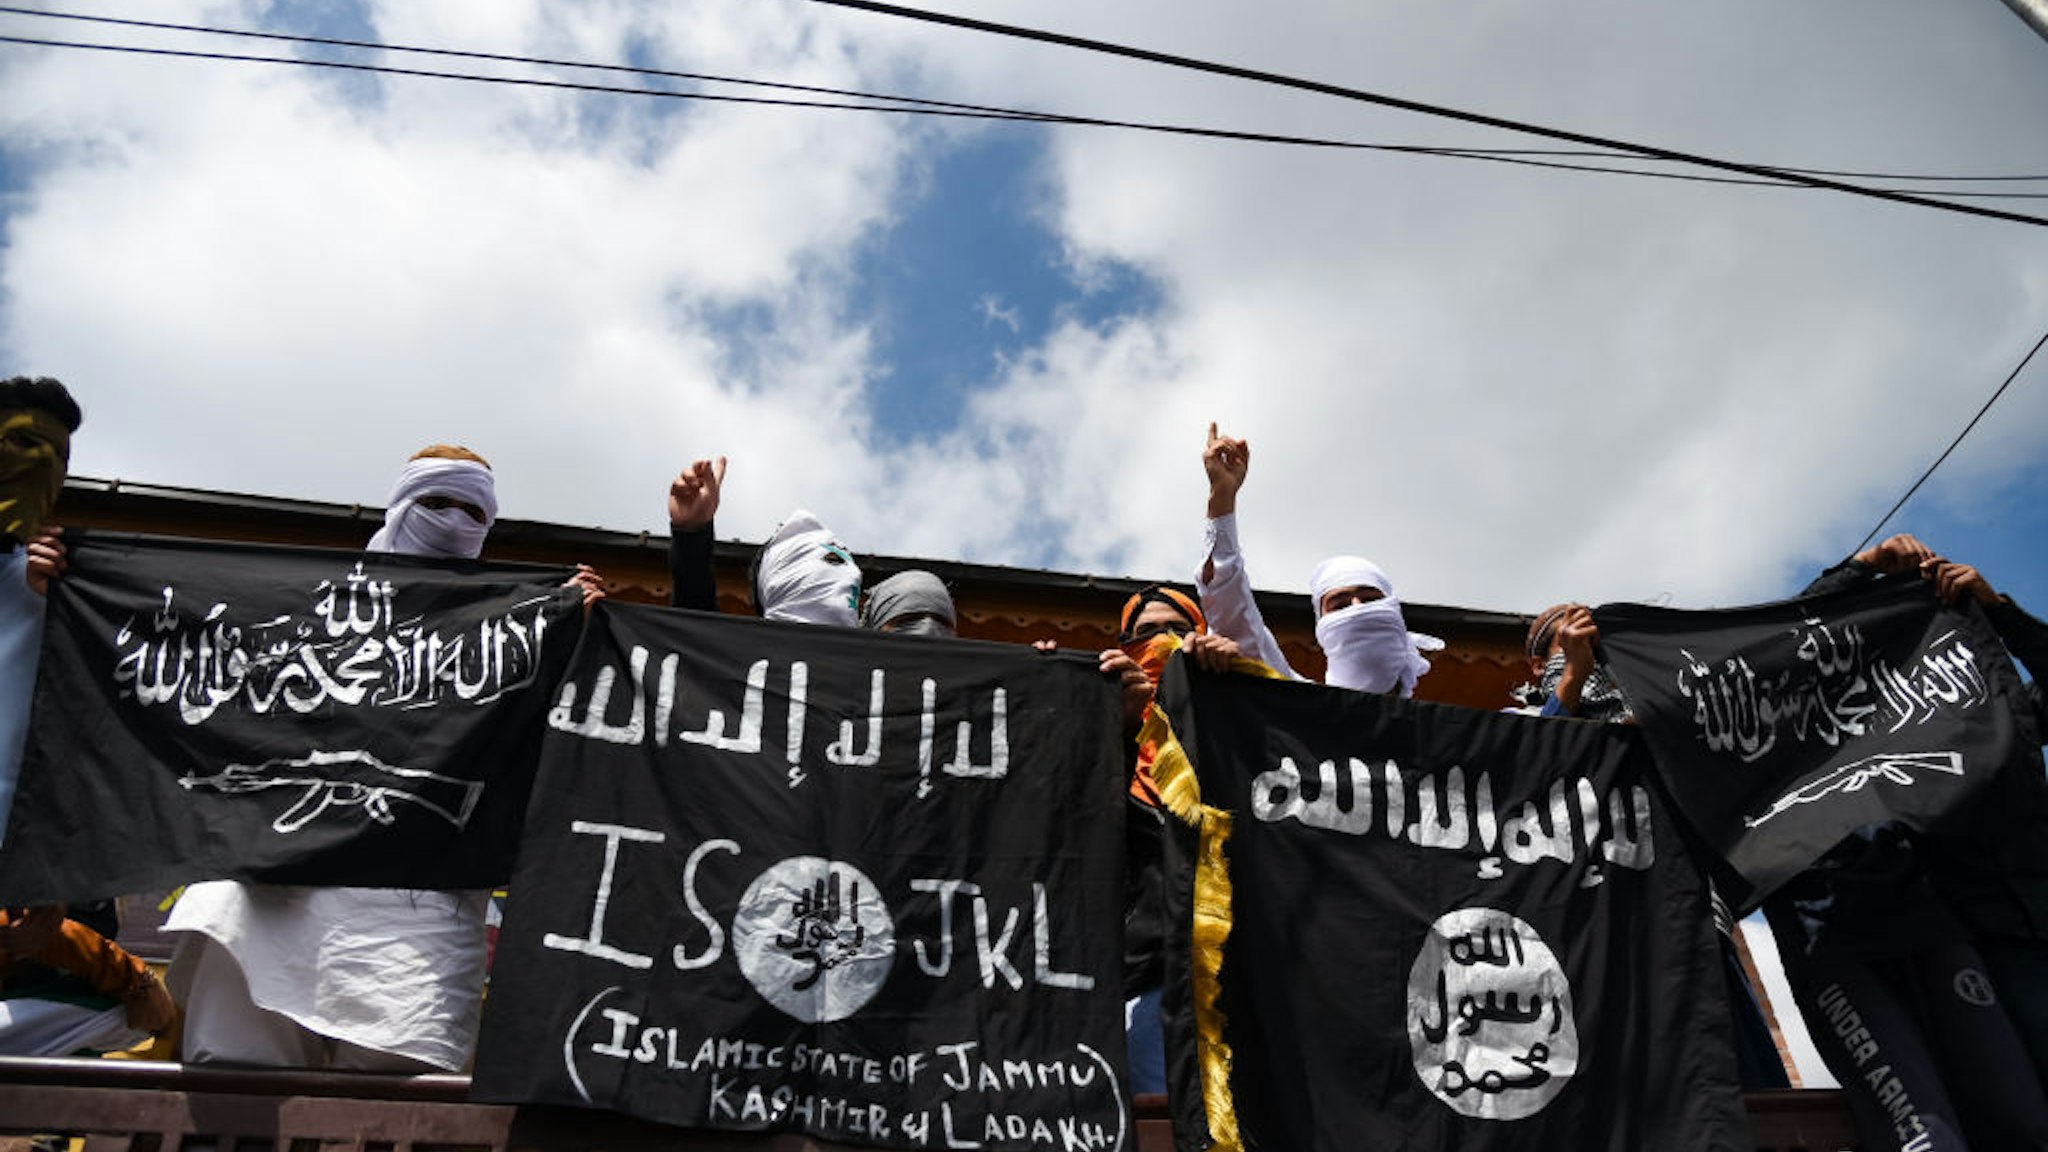 Kashmiri Protesters hold ISIS flags while making gestures during a protest in Srinagar. Indian forces in Srinagar used teargas smoke canisters and bullets to disperse hundreds of Protesters who took to streets after Eid-ul-Fitr prayers protesting against the Indian Rule in the region.